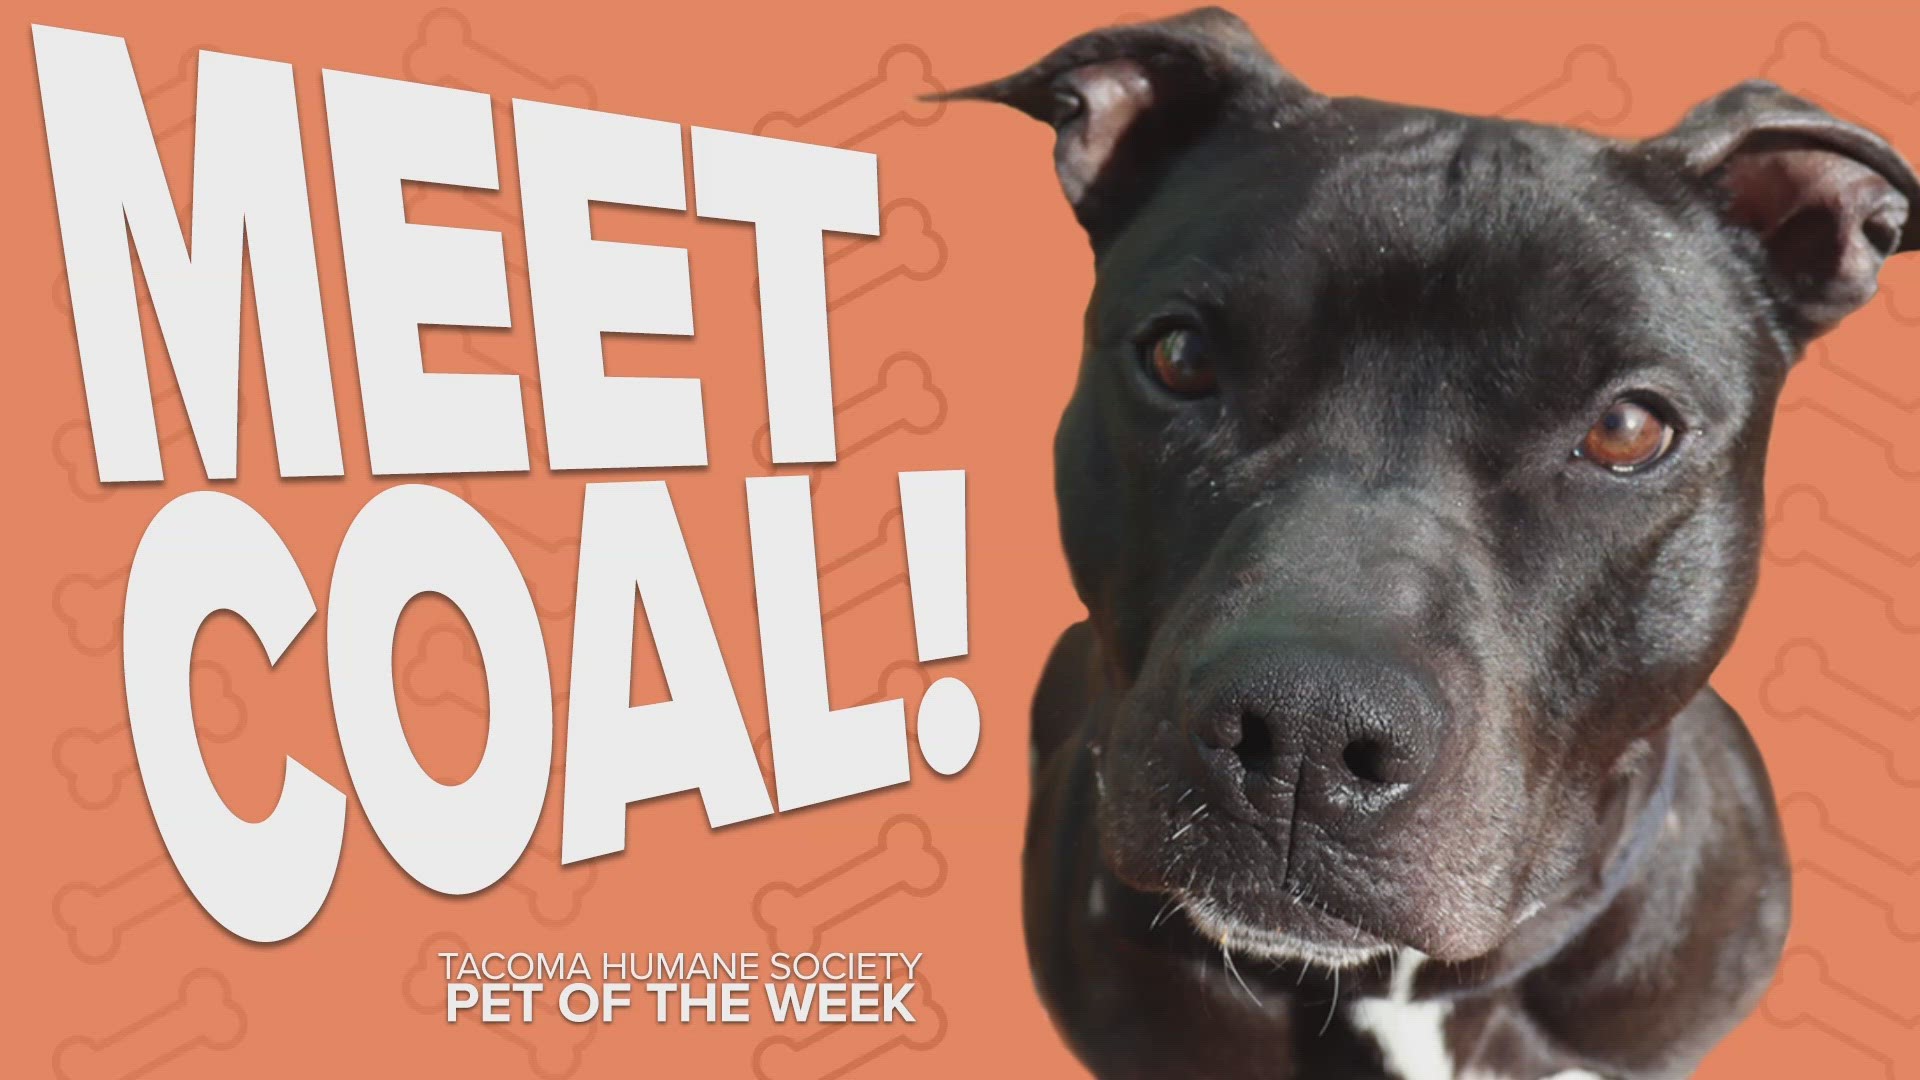 Coal is the Tacoma Humane Society's Pet Rescue of the week!